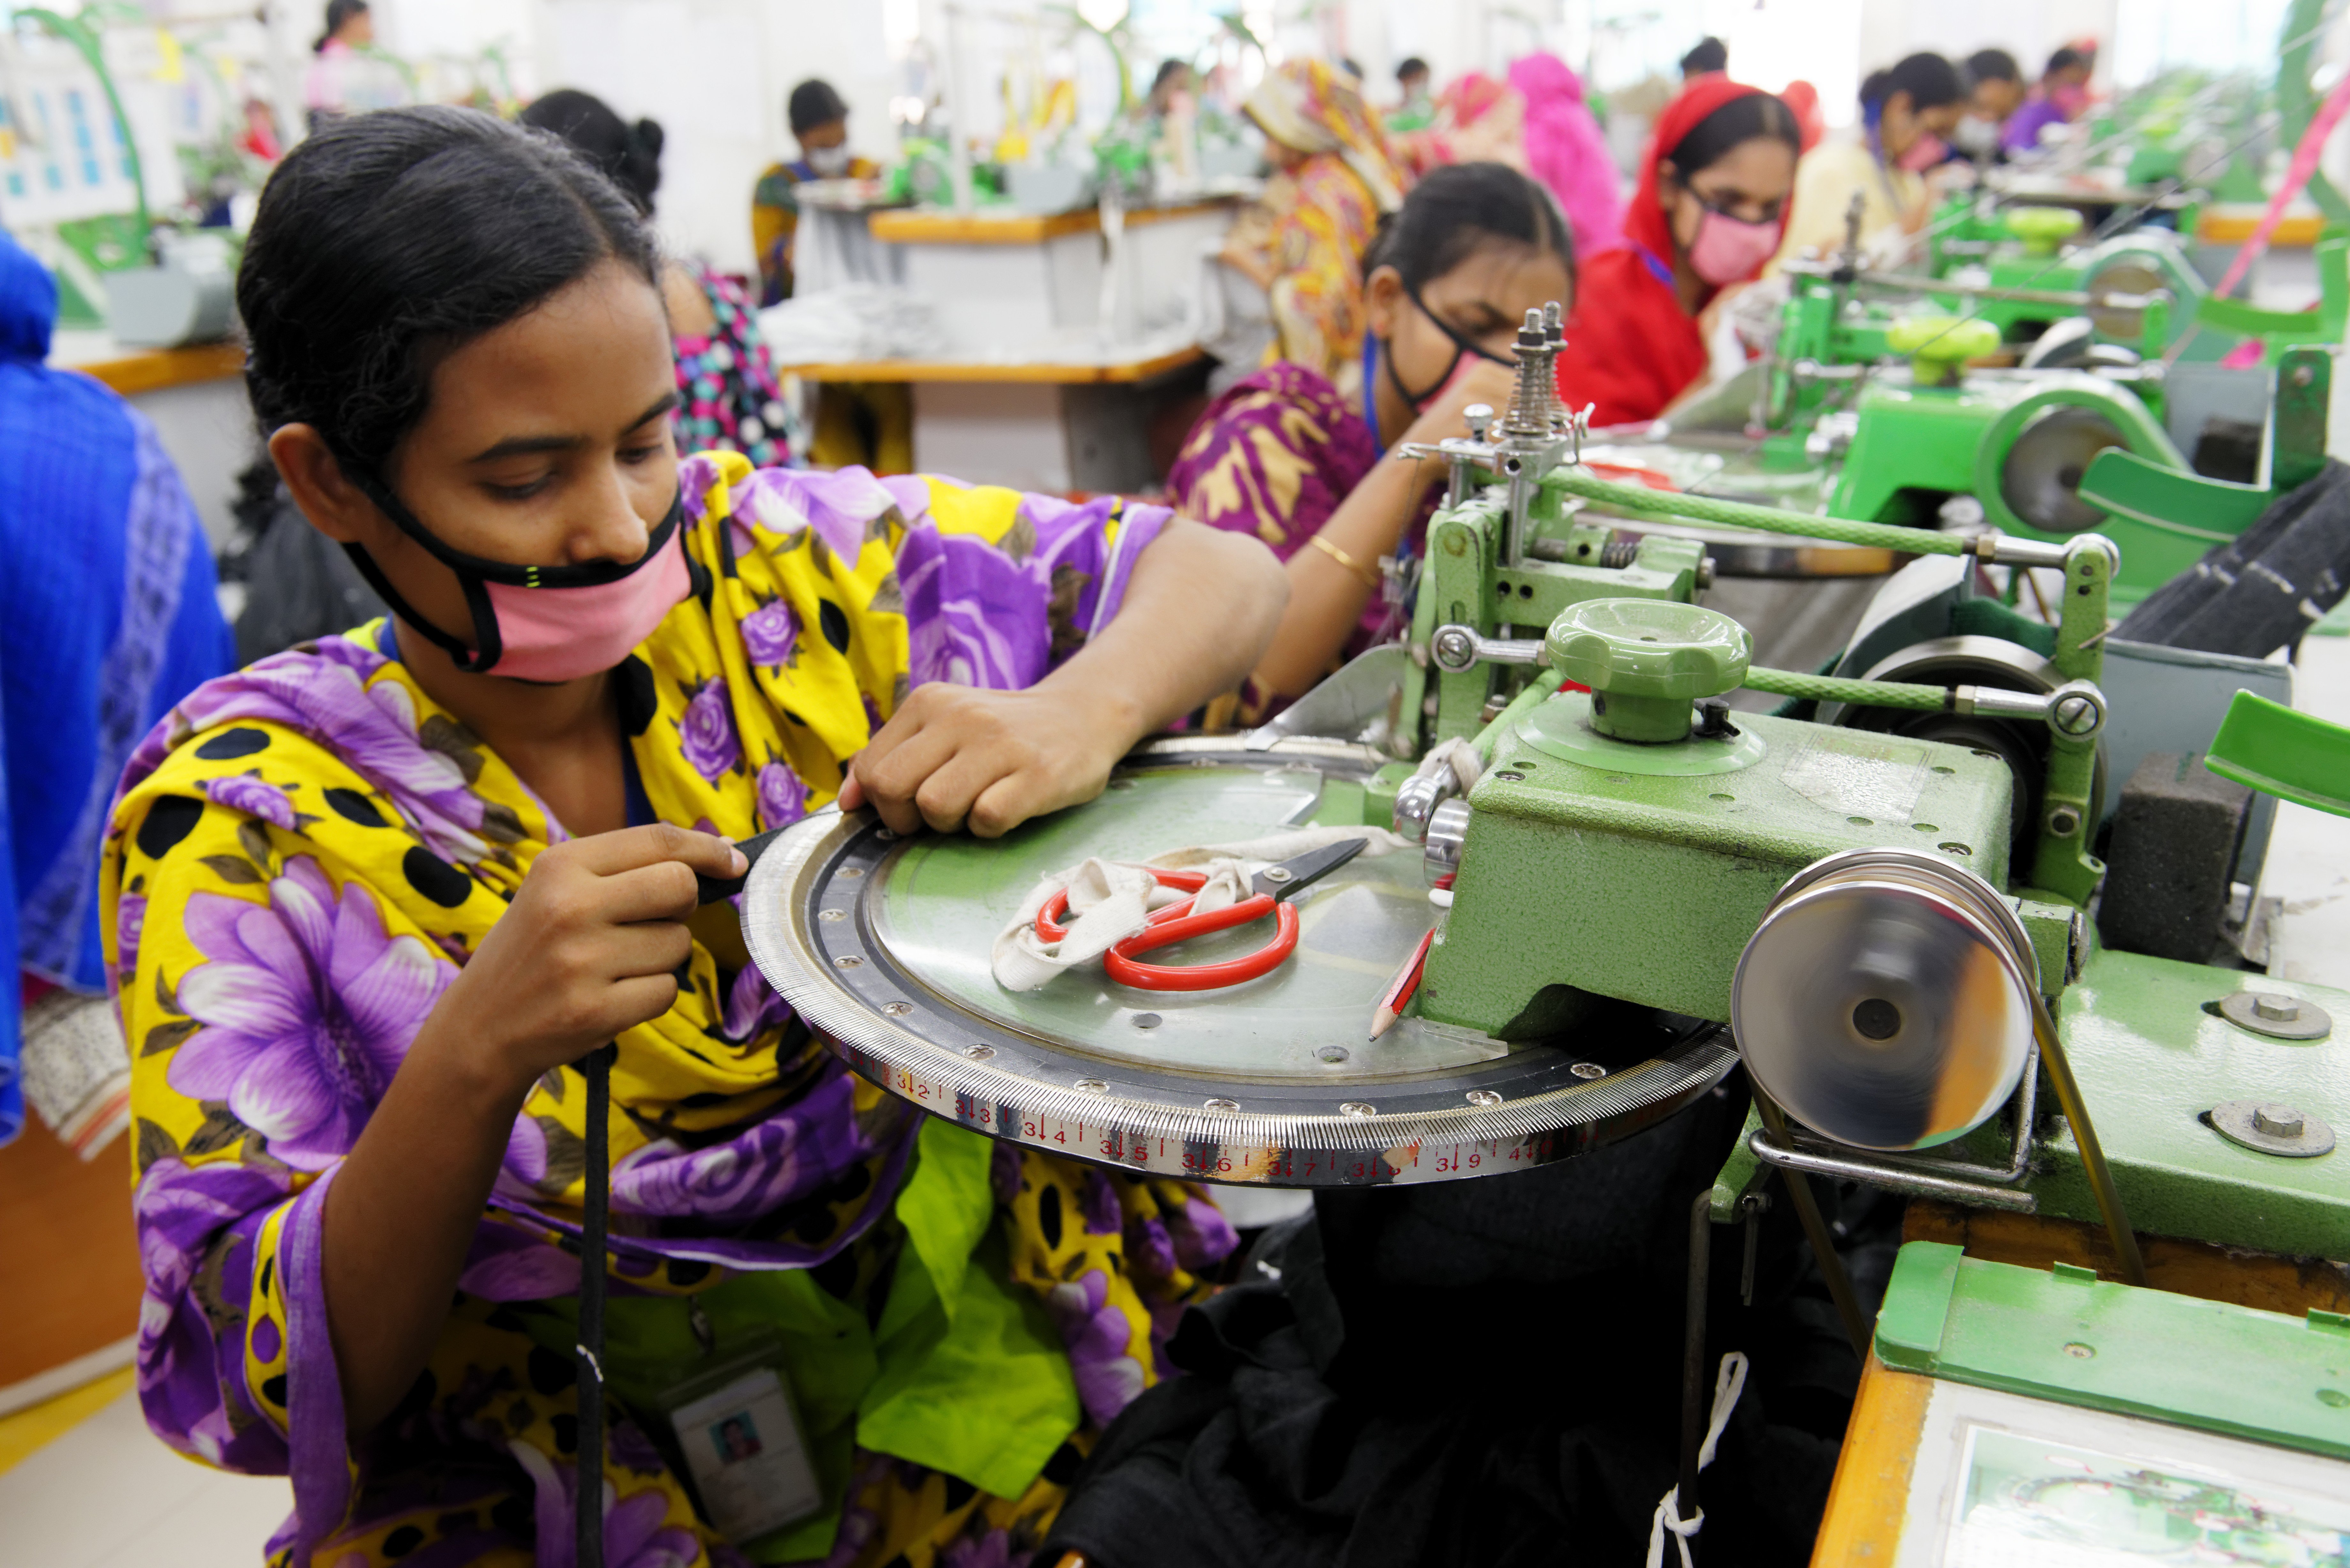 Industry figures say the garment factory trade has turned a corner. But even if safety has improved, wages are another matter